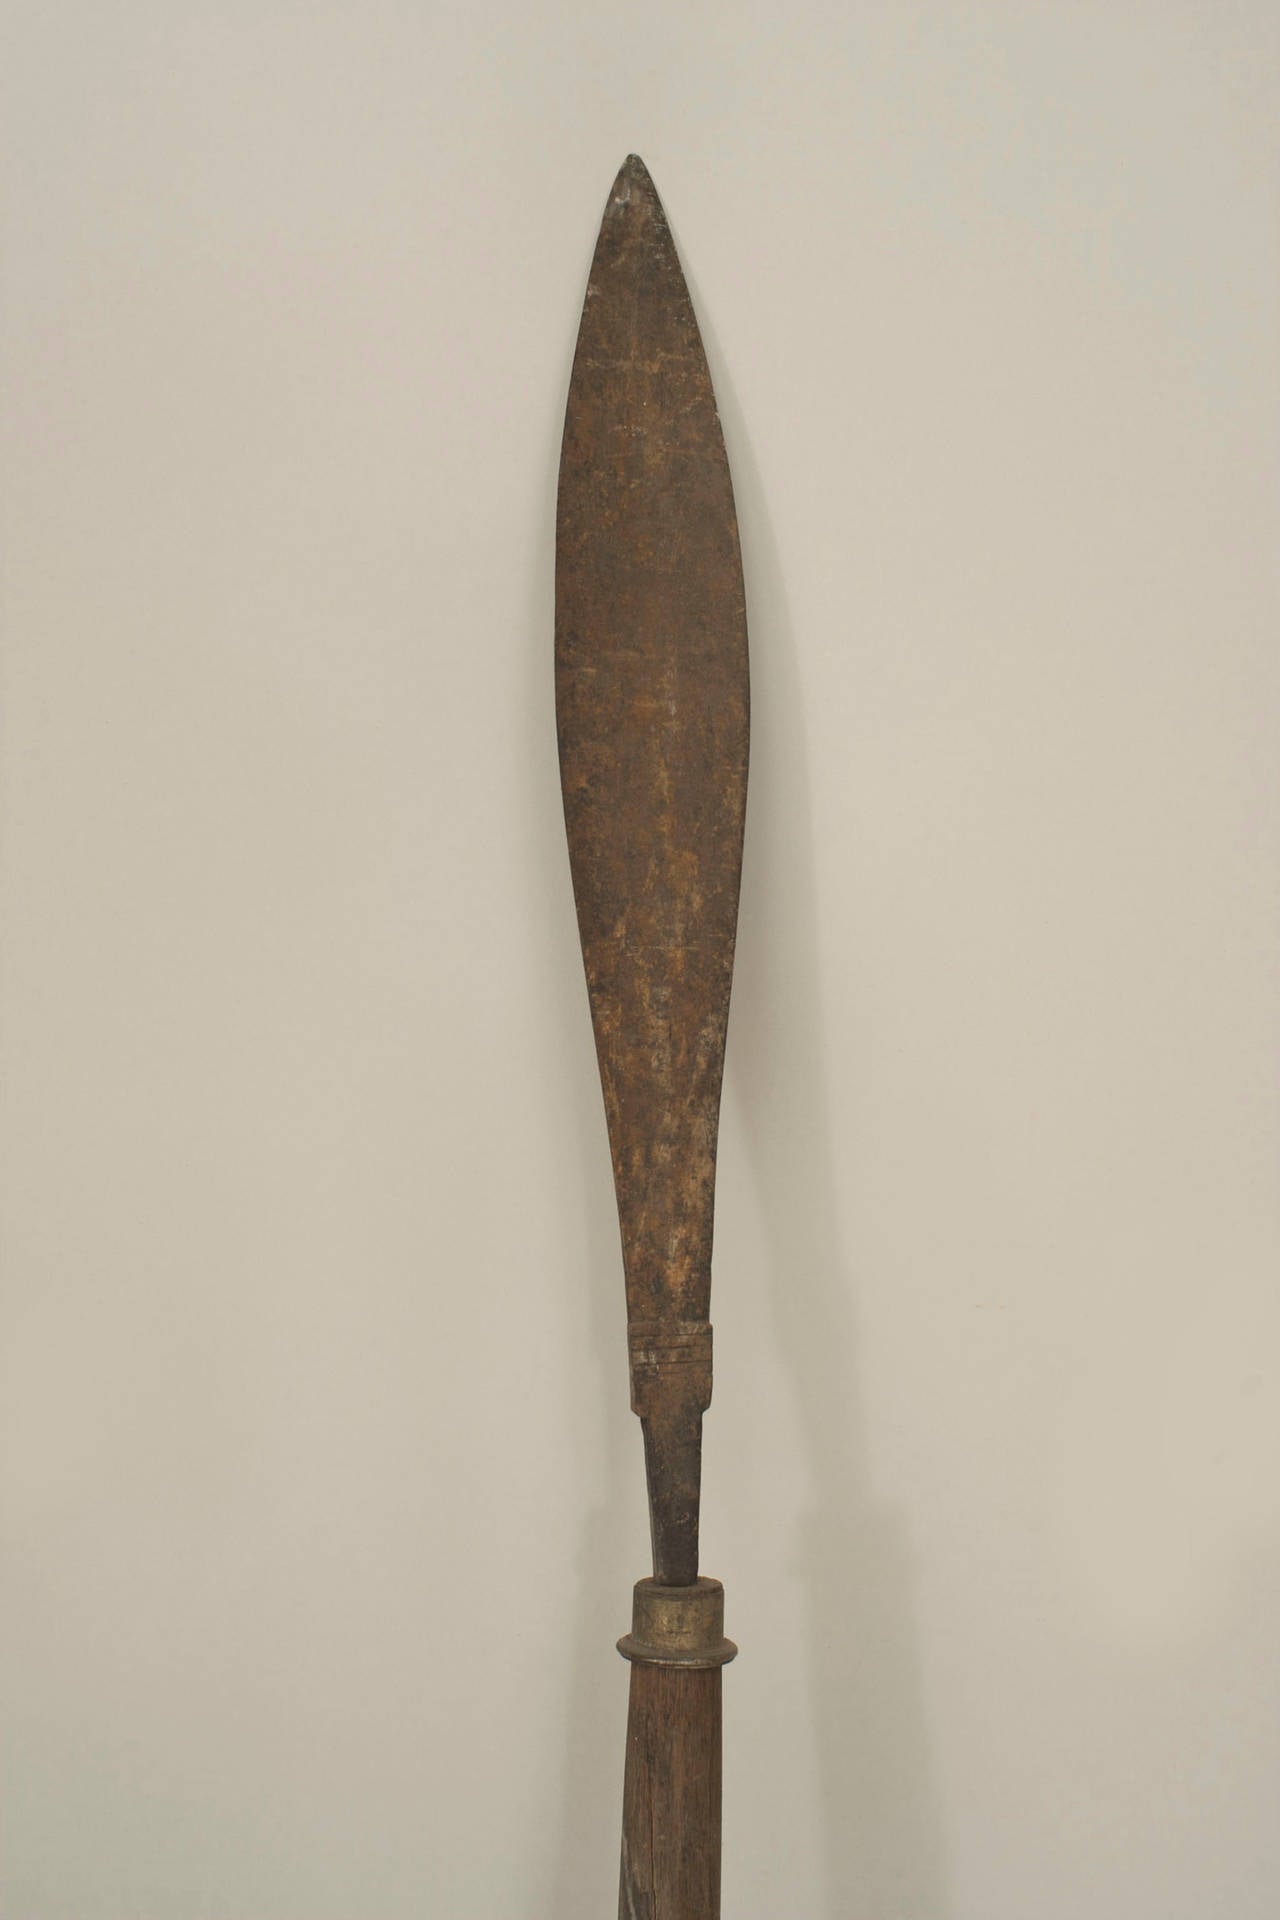 English Renaissance-style spear with wooden shaft and simple 15-inch leaf-shaped iron blade.
